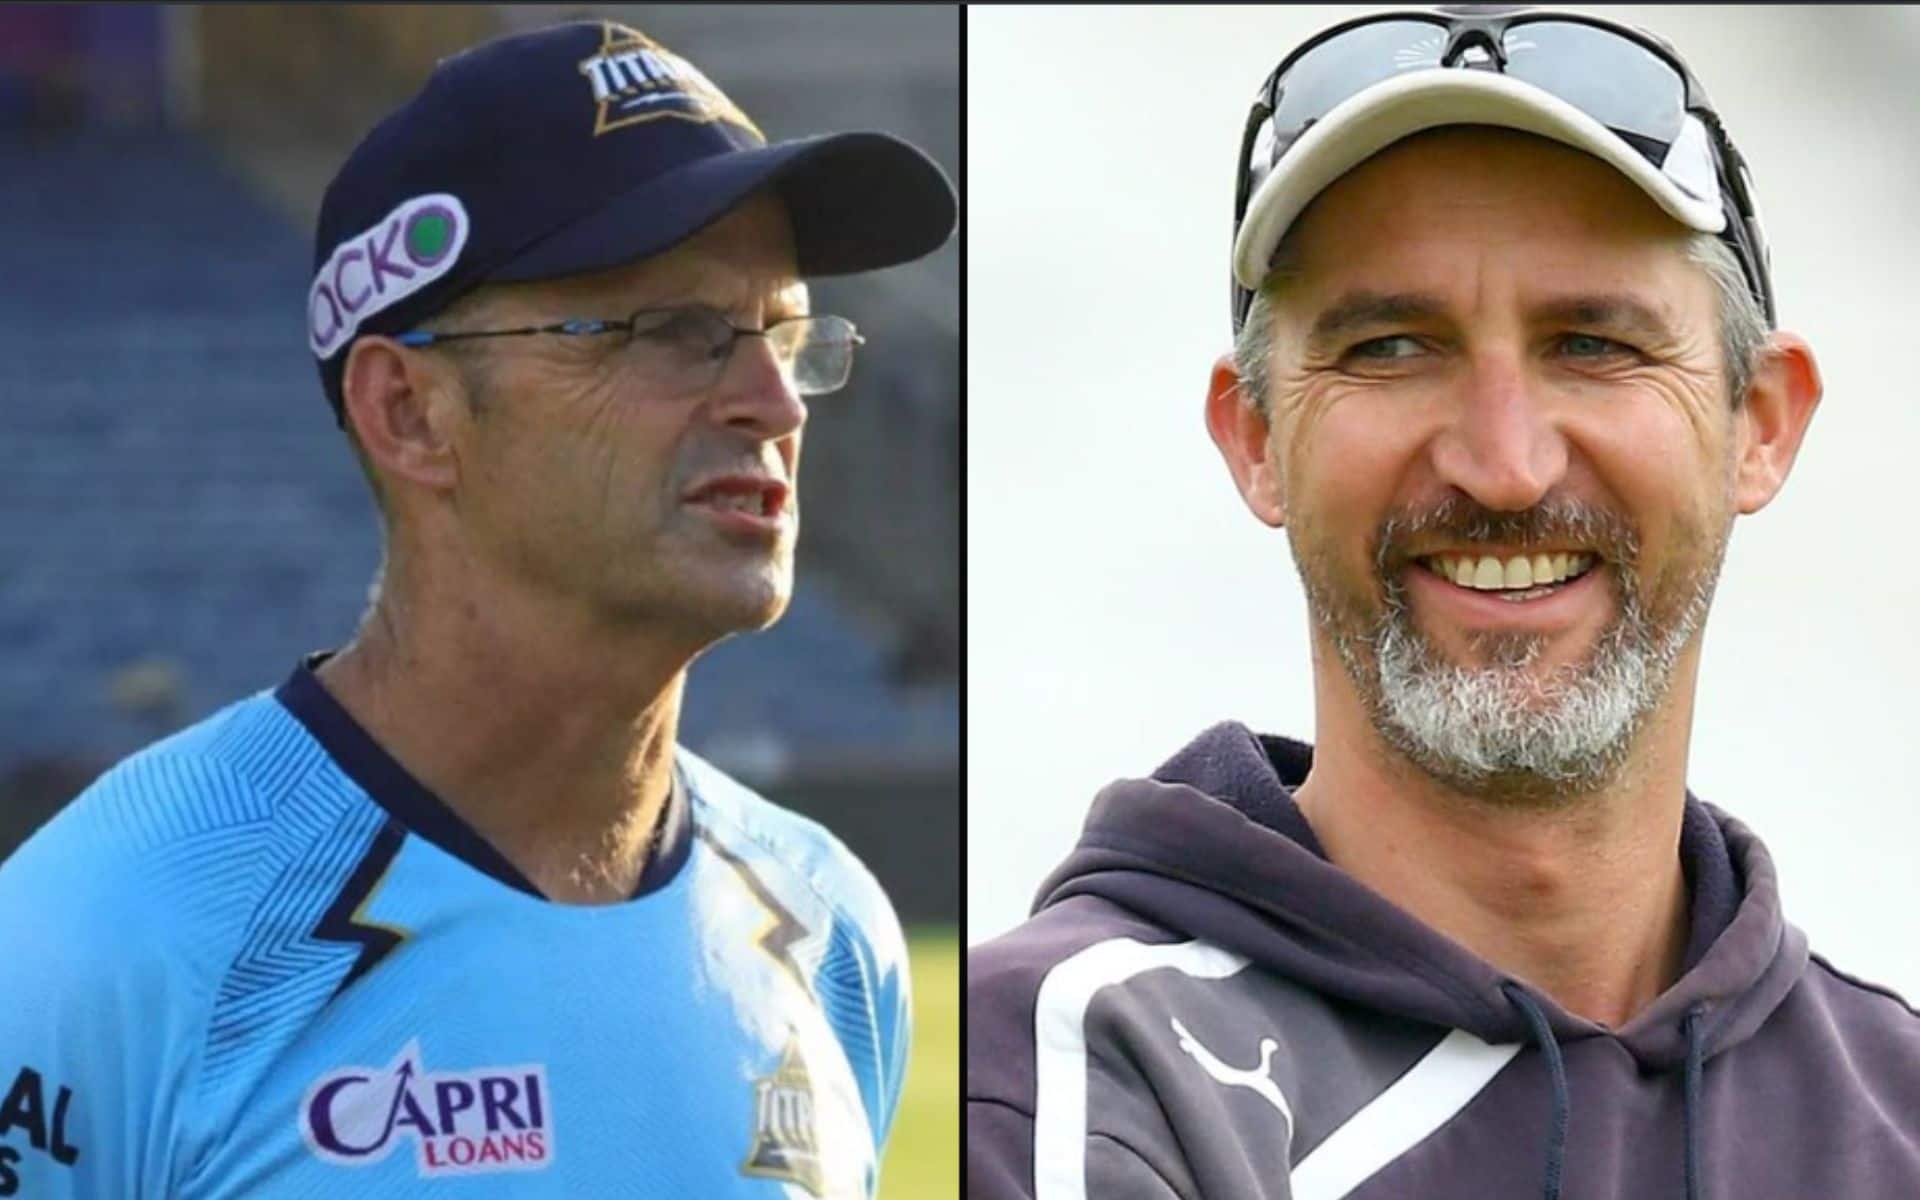 Gary Kirsten is the new head coach for Pakistan's limited-overs teams, and Jason Gillespie is the Test coach